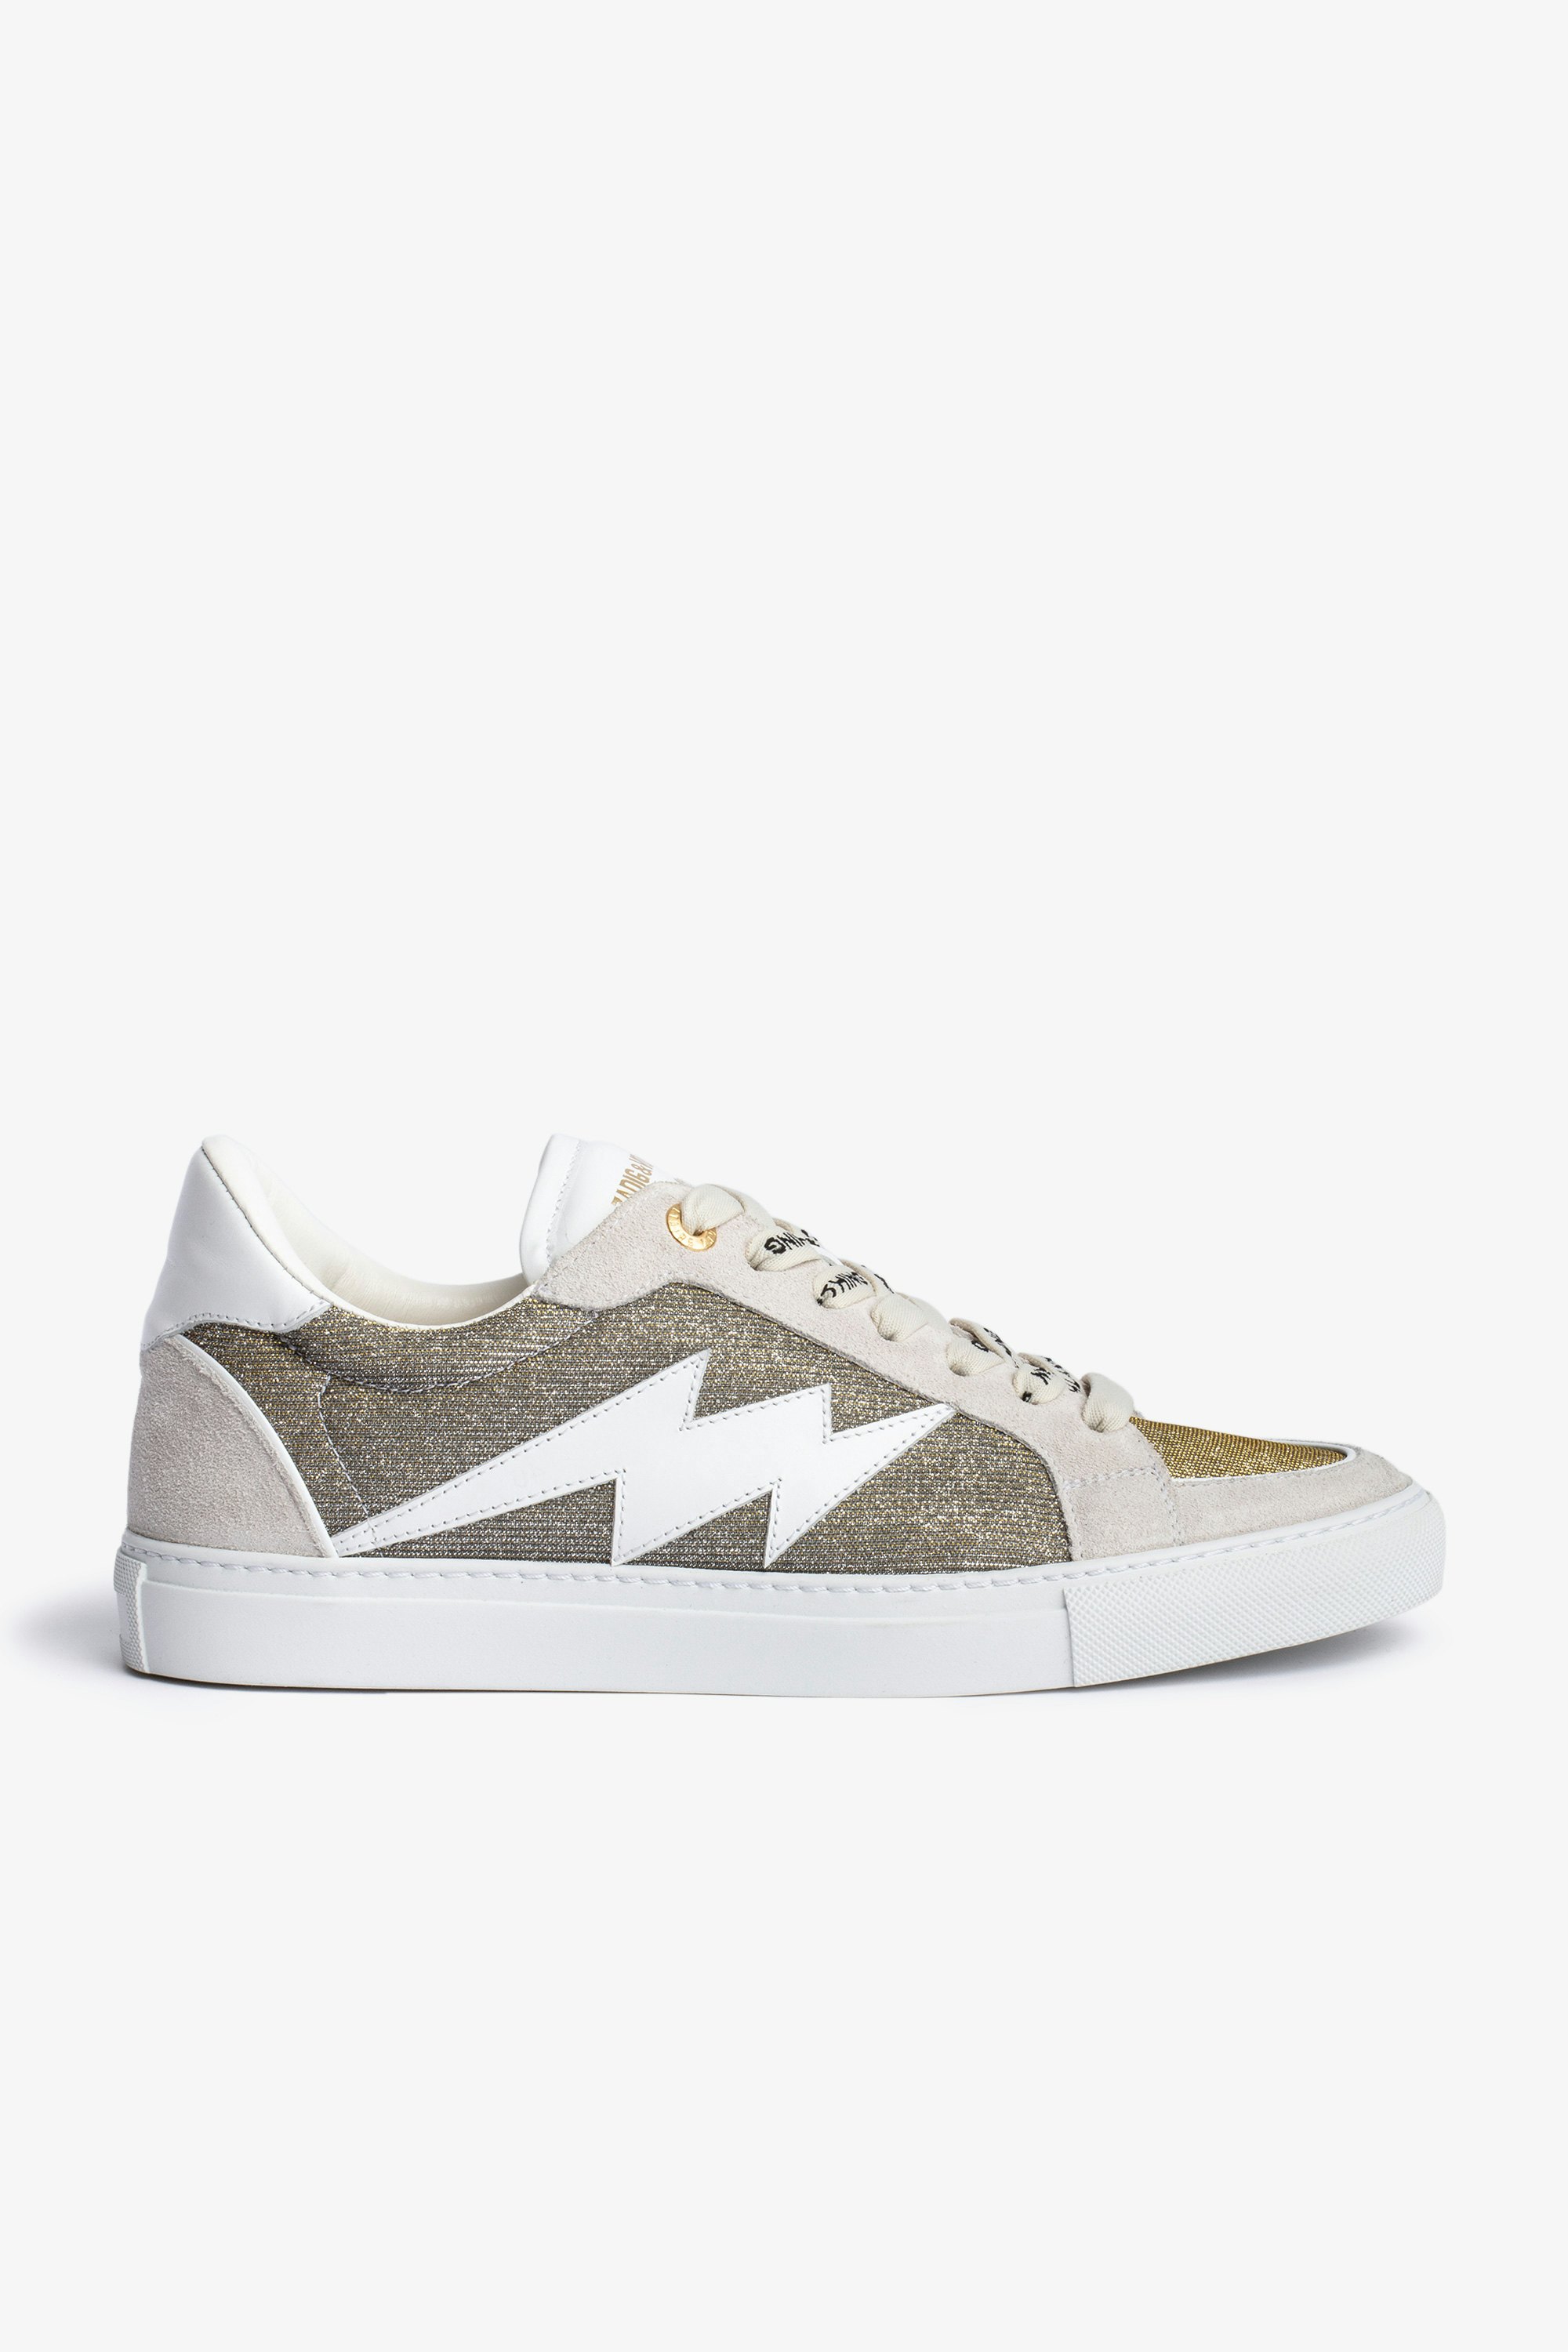 ZV1747 スニーカー Women's sneakers in white leather and silver glittery fabric